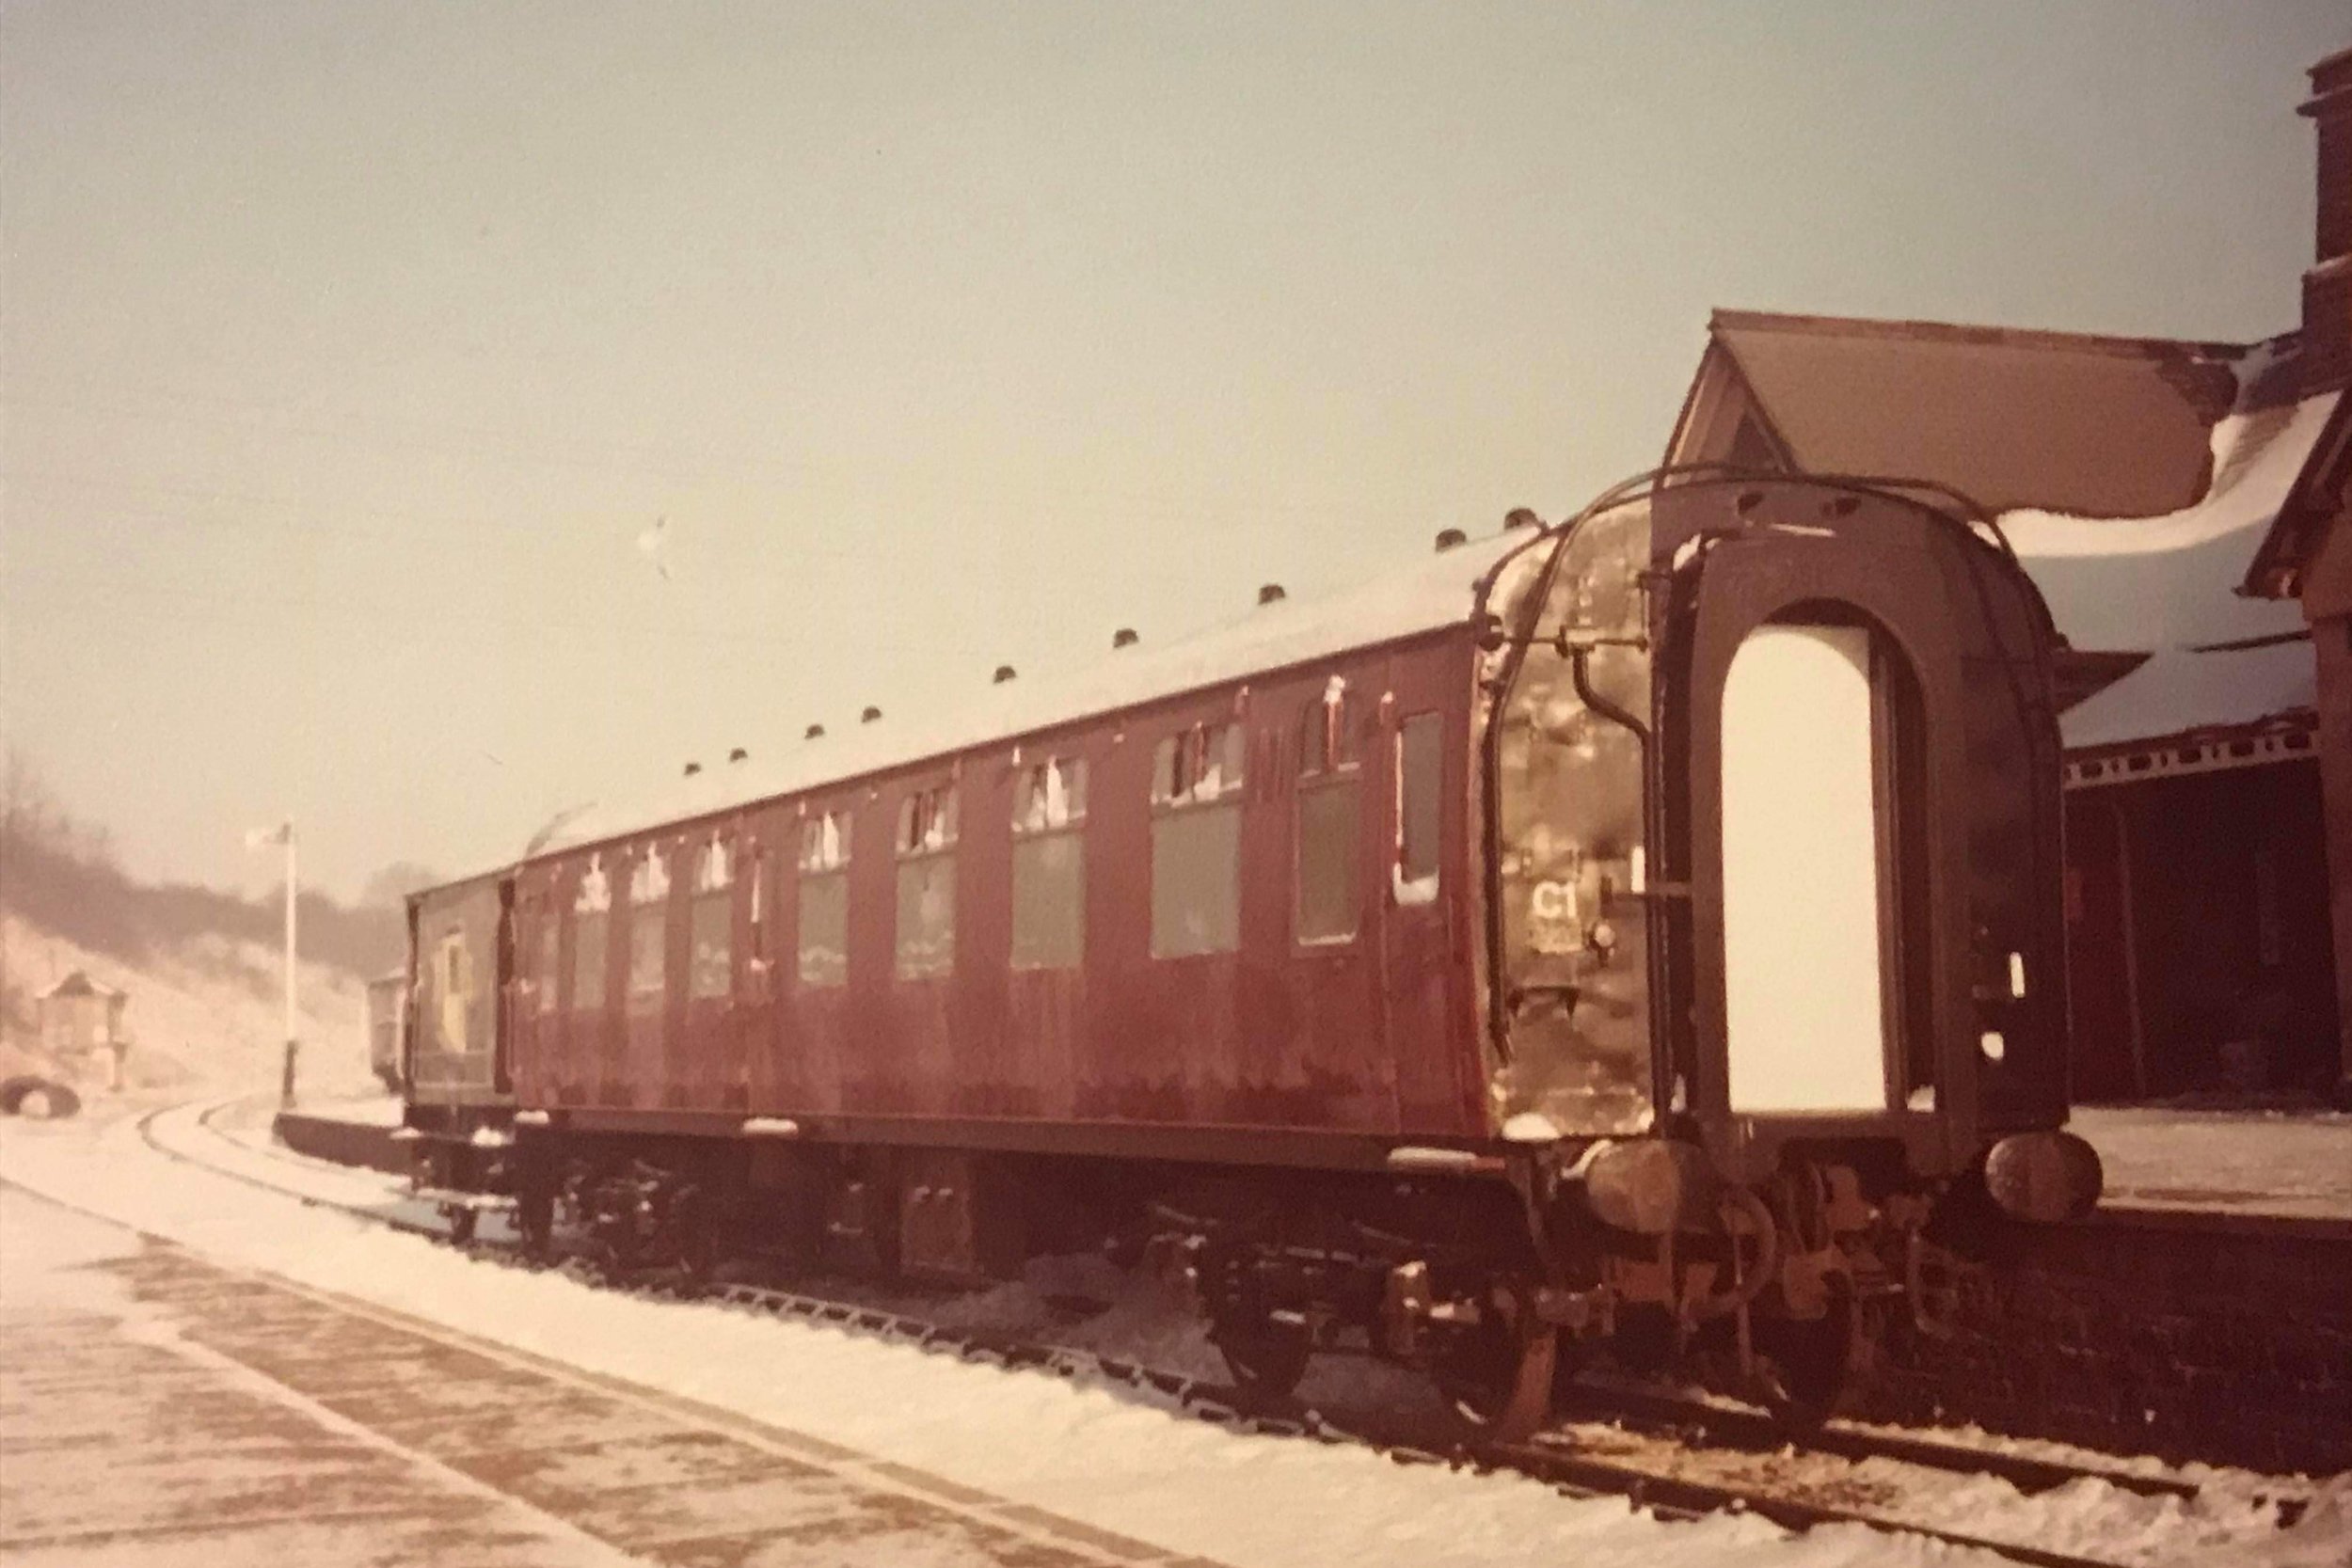 15447 is seen in the platform at Bitton Station in 1978. It was painted maroon the previous year.